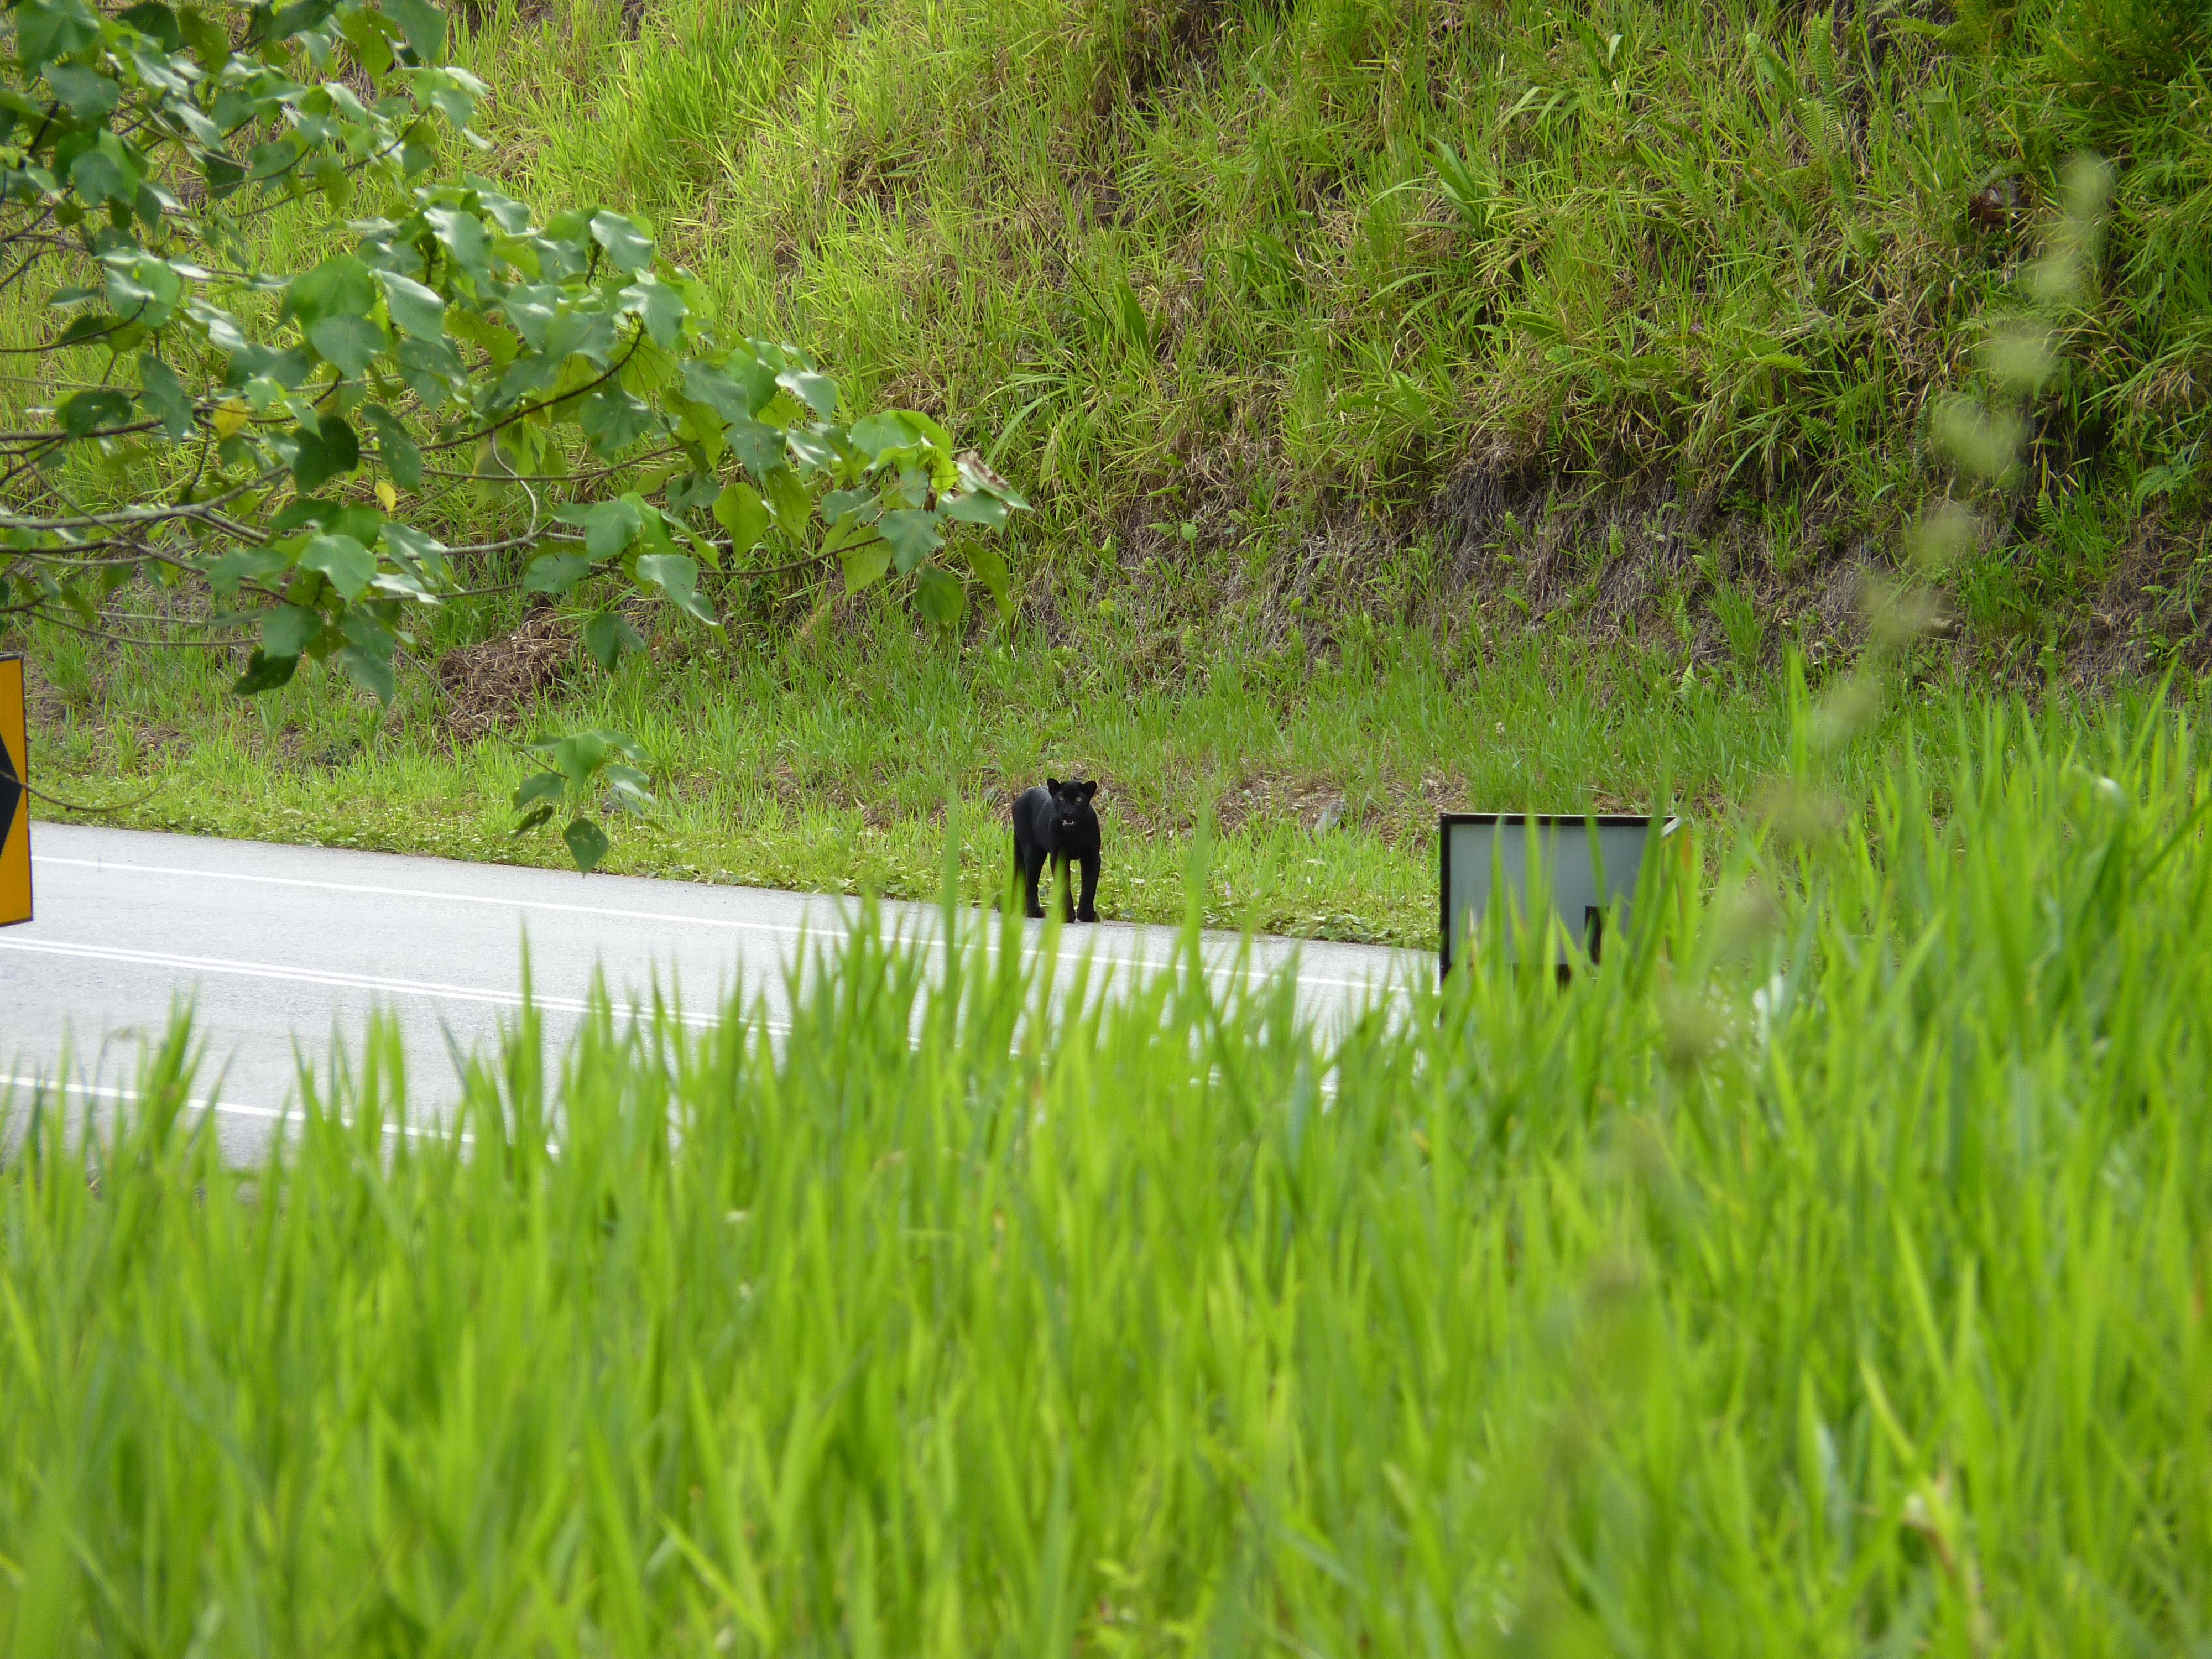 A "black panther" next to a road